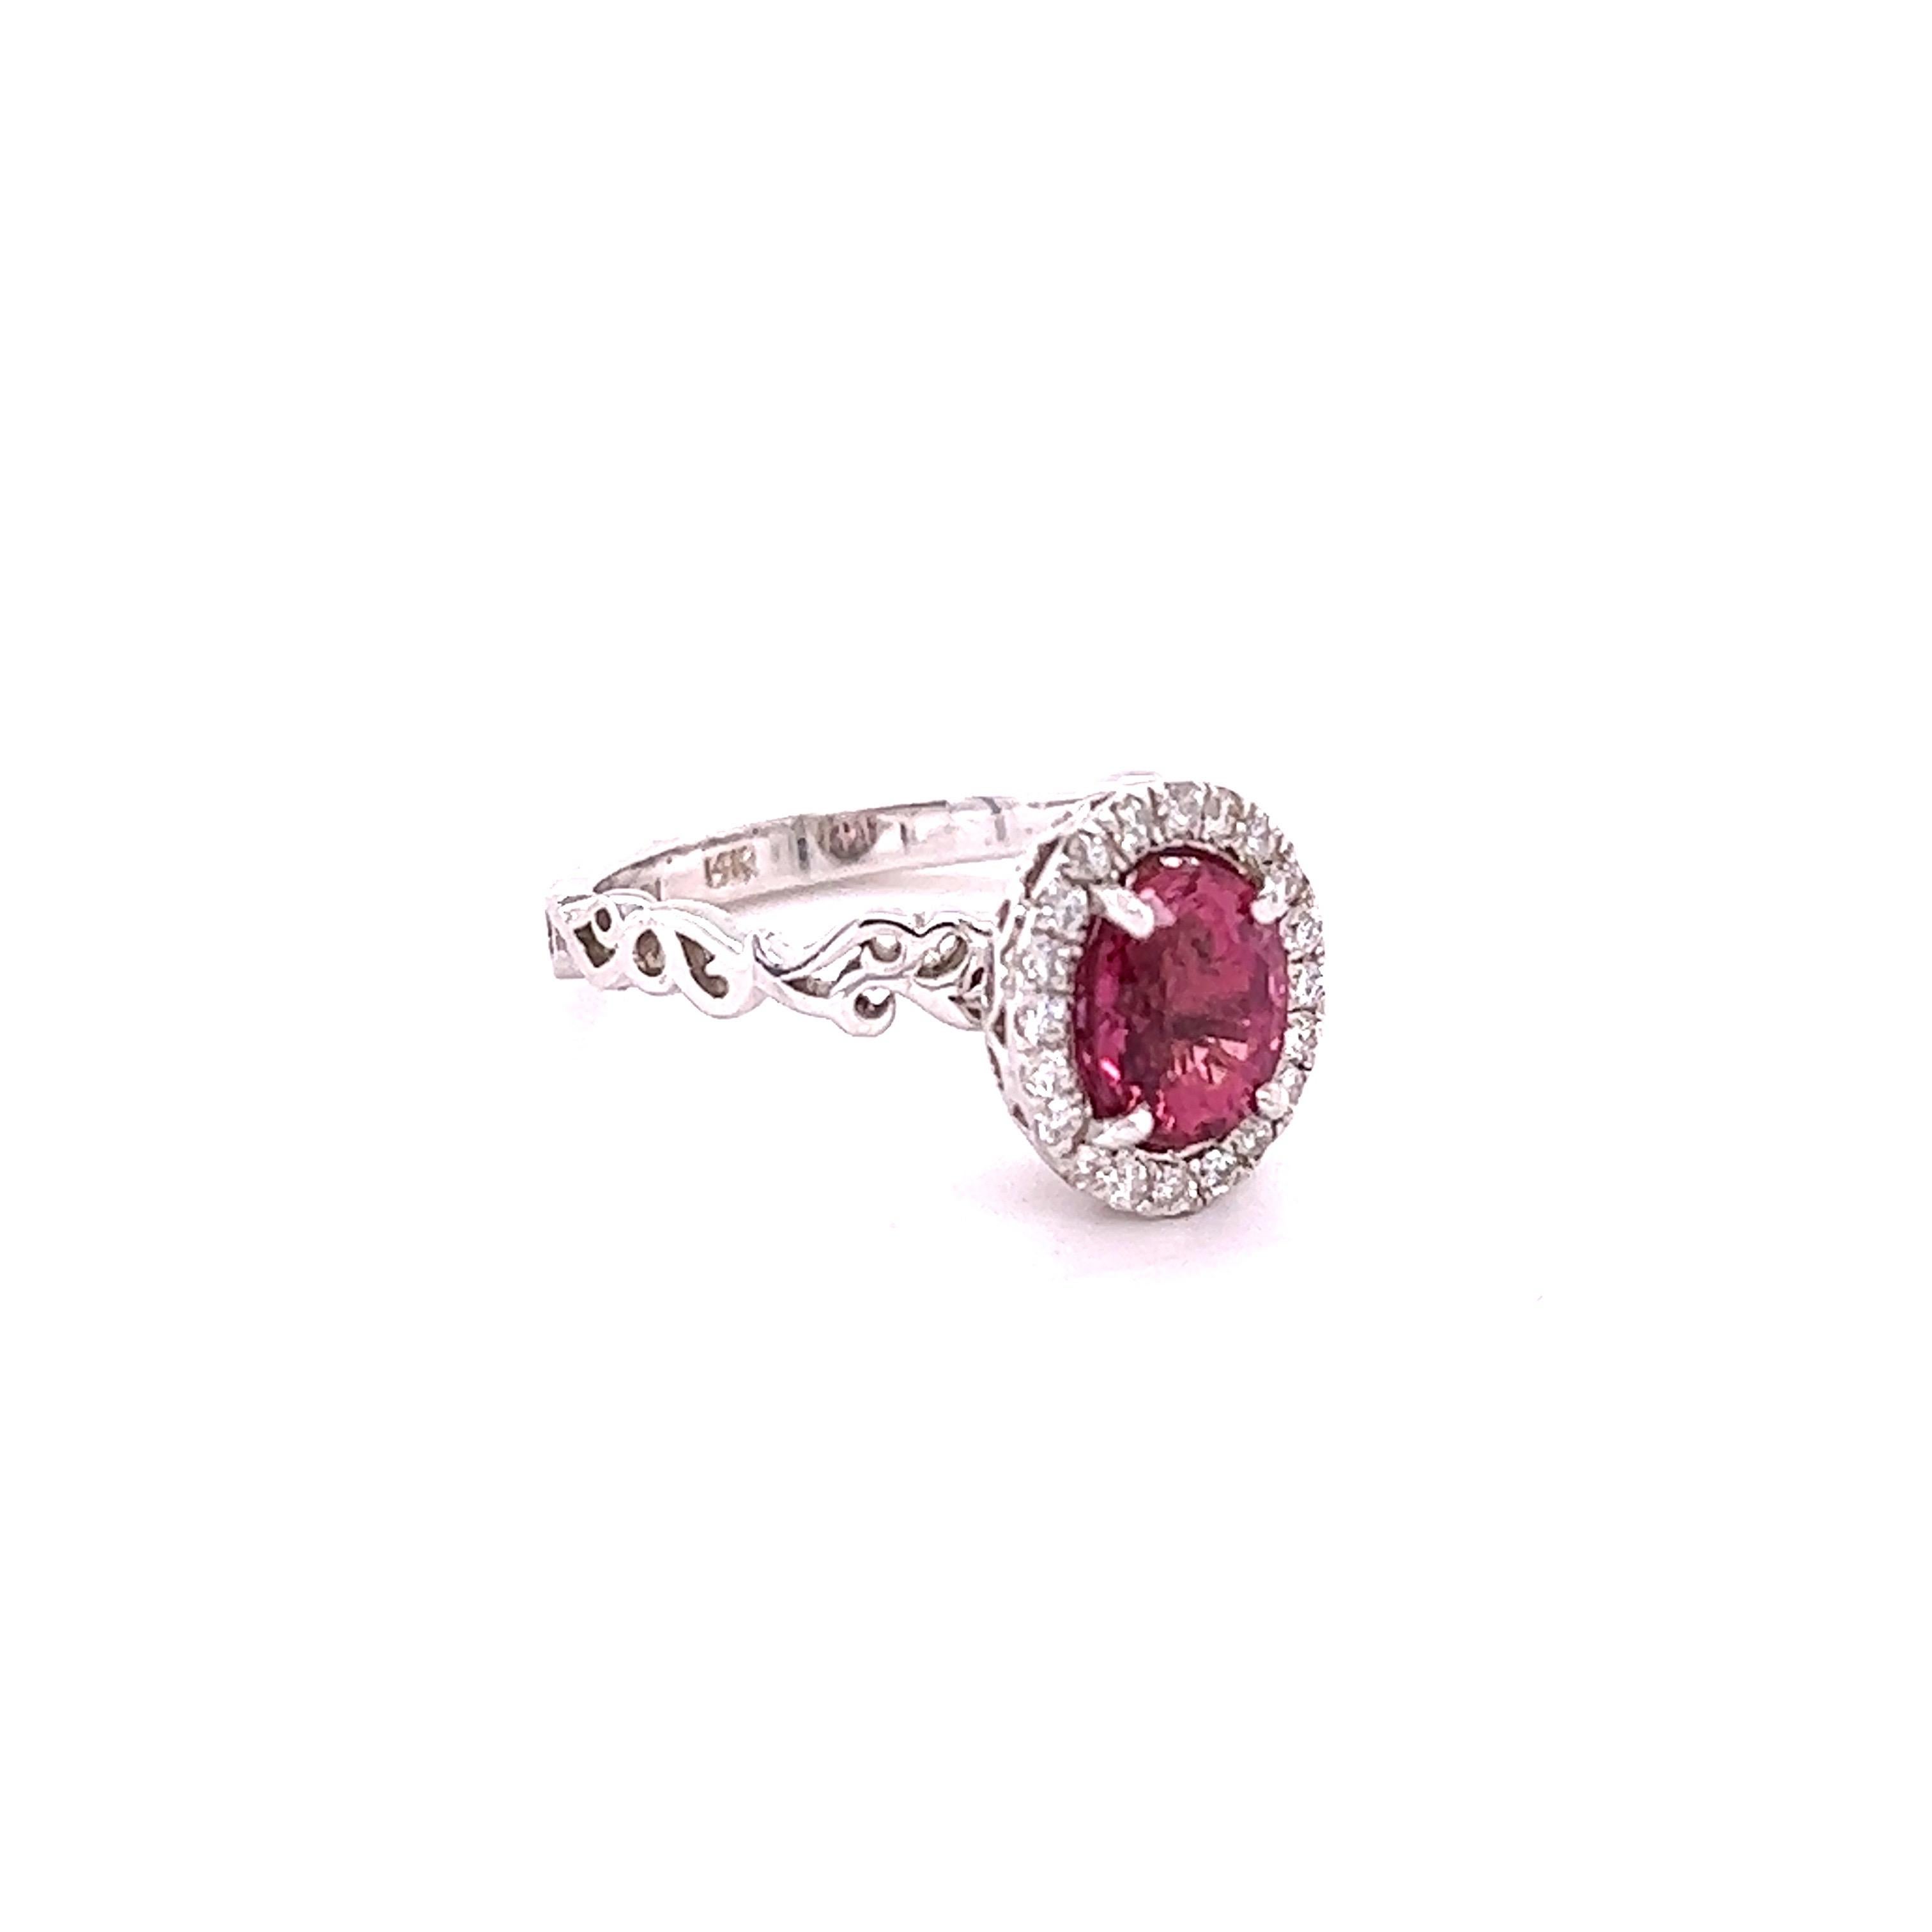 This ring has a Oval Cut Hot Pink Tourmaline that weighs 1.49 Carats and has 20 Round Cut Diamonds that weigh 0.22 carats. The clarity and color of the diamonds are SI-F.
The total carat weight of the ring is 1.77 Carats. 
The Emerald Cut Tourmaline